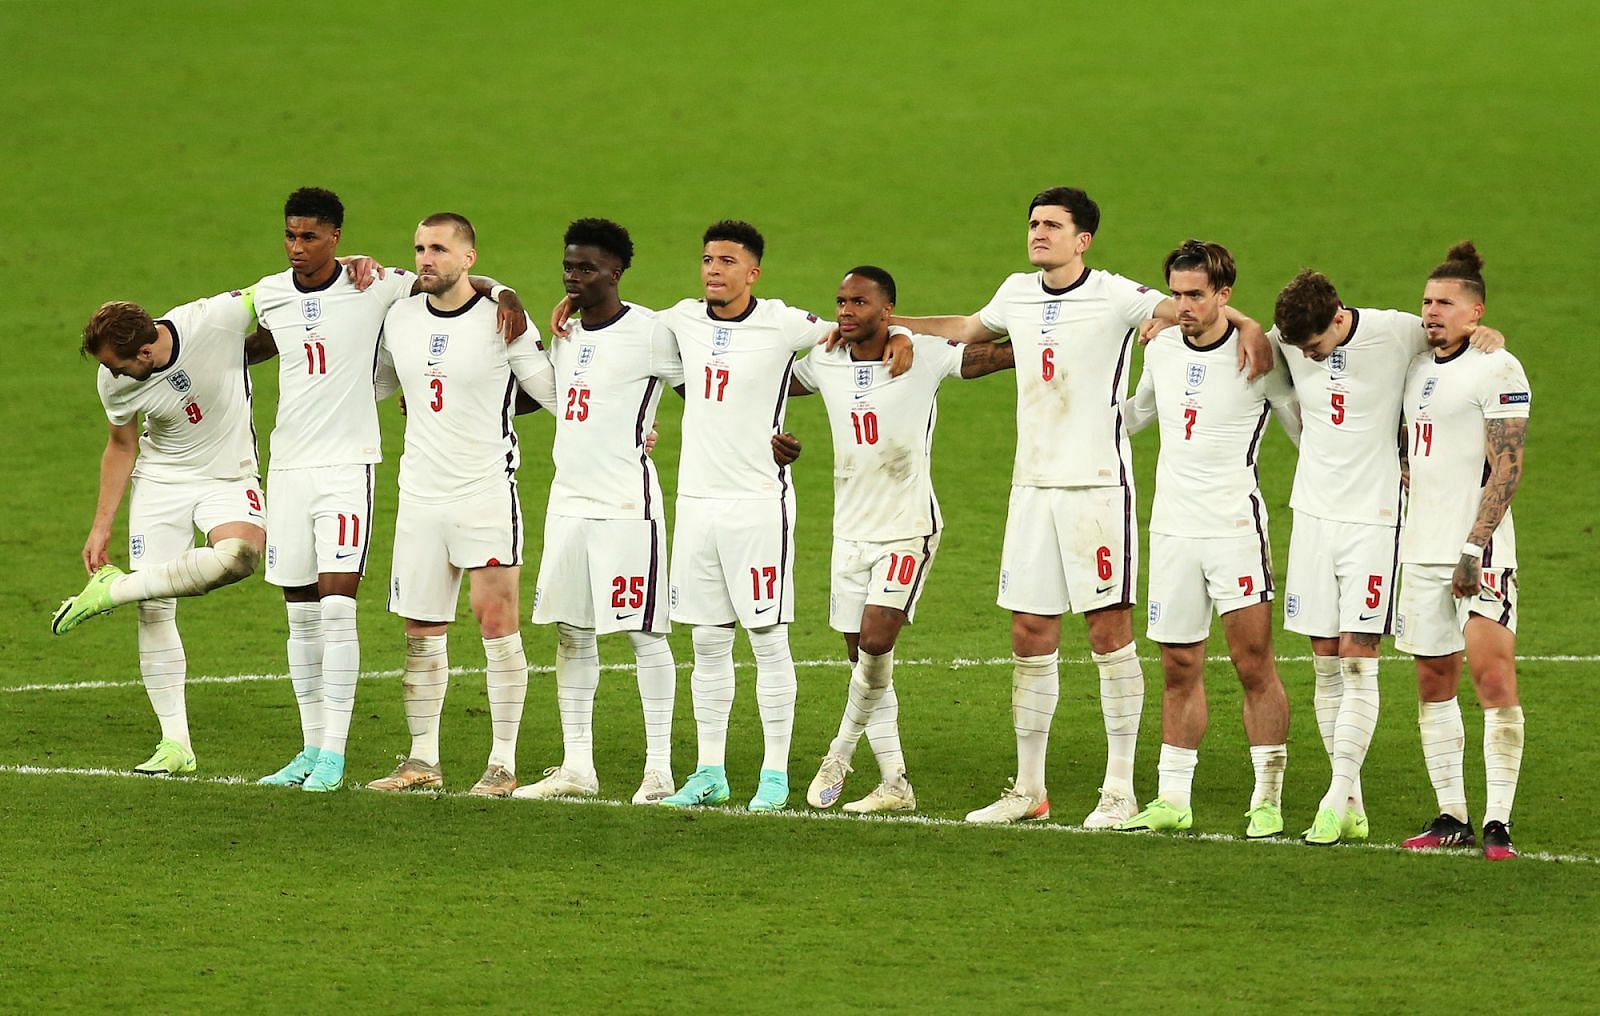 England squad for 2022 FIFA World Cup Player list, Age, Total wins